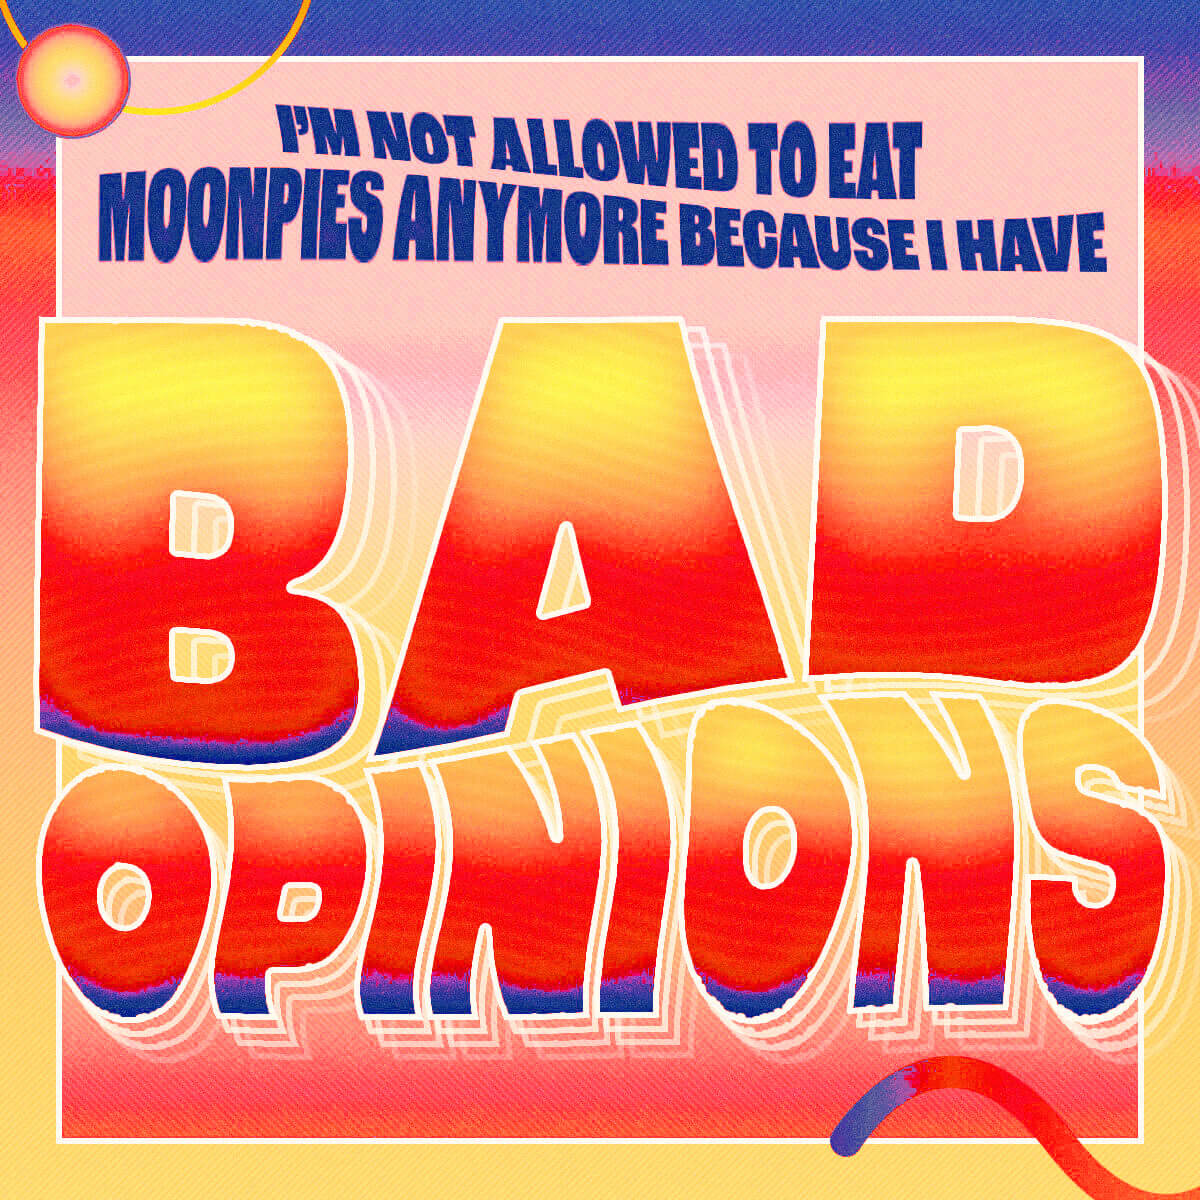 I Have Bad Opinions wallpaper version